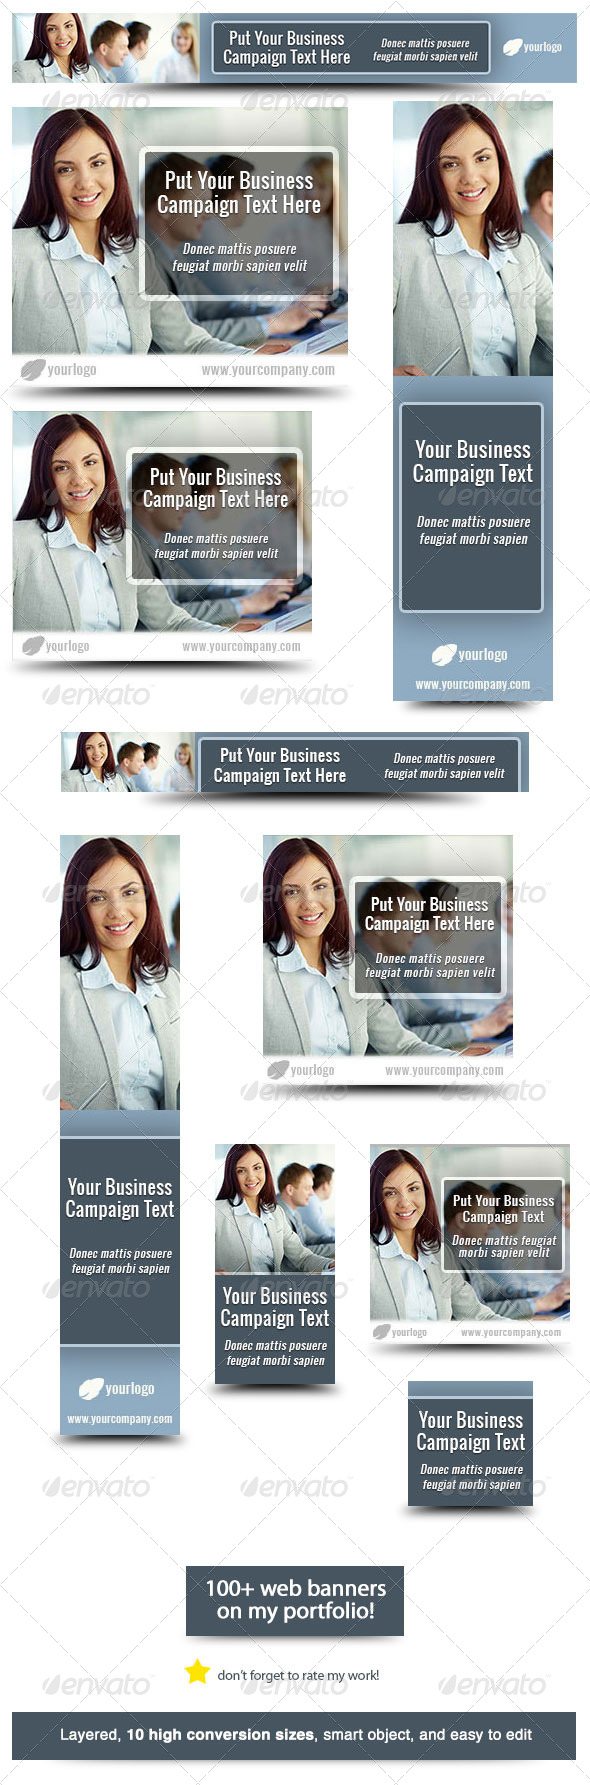 Business Banner Design Template 3 by admiral_adictus | GraphicRiver